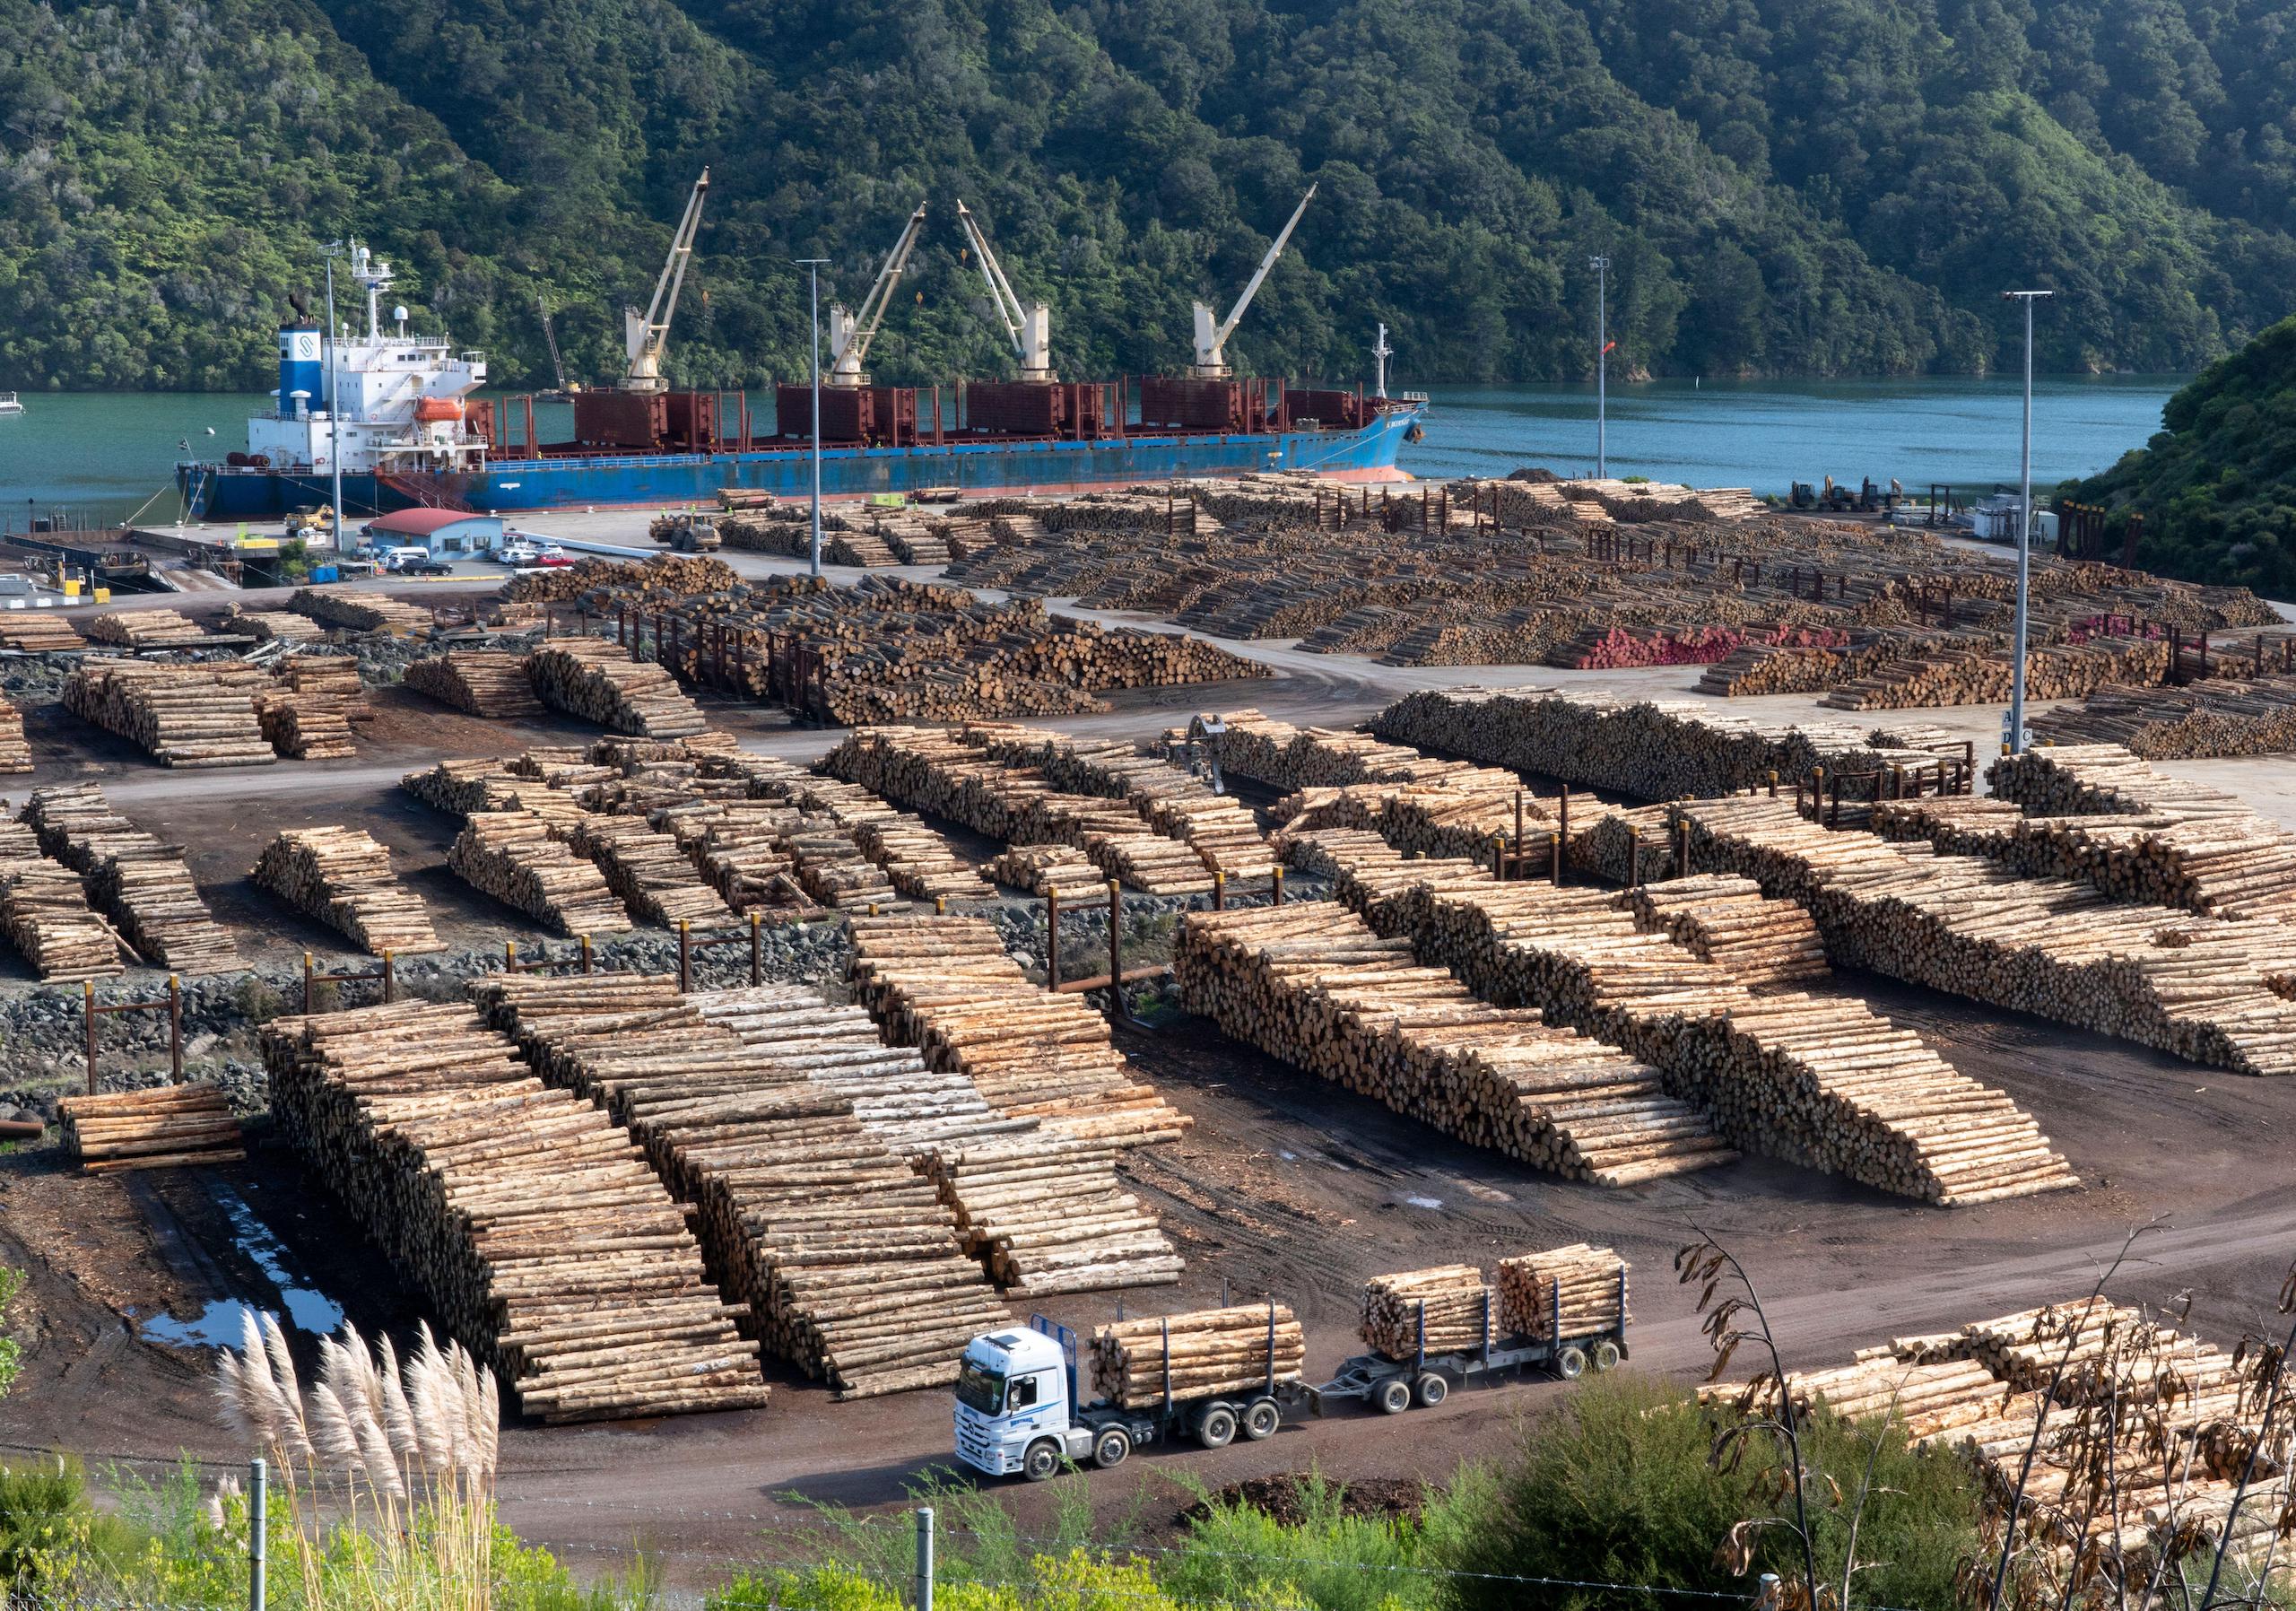 Export timber bound for China, Picton, New Zealand. 12th Apr, 2021. Logs being prepared for loading on the vessel 'K Winner', bound for China at the Shakespeare Bay Wharf in Picton, New Zealand. According to recent reports New Zealand wood processing indu